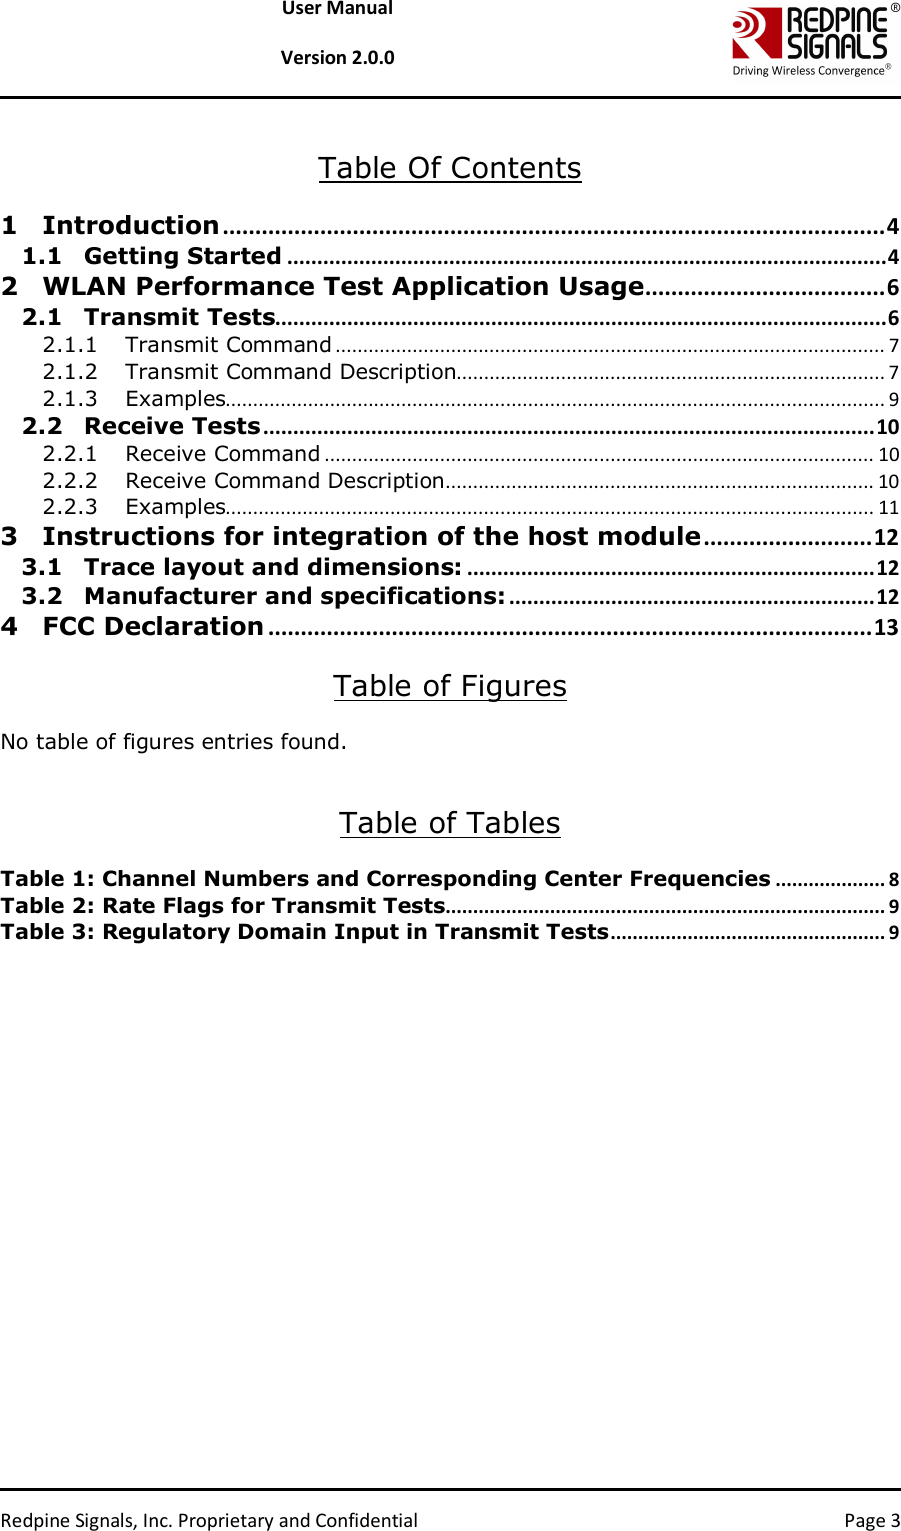   Redpine Signals, Inc. Proprietary and Confidential  Page 3 User Manual  Version 2.0.0  Table Of Contents  1 Introduction ...................................................................................................... 4 1.1 Getting Started .................................................................................................... 4 2 WLAN Performance Test Application Usage ..................................... 6 2.1 Transmit Tests...................................................................................................... 6 2.1.1 Transmit Command .................................................................................................... 7 2.1.2 Transmit Command Description.............................................................................. 7 2.1.3 Examples........................................................................................................................ 9 2.2 Receive Tests ...................................................................................................... 10 2.2.1 Receive Command .................................................................................................... 10 2.2.2 Receive Command Description .............................................................................. 10 2.2.3 Examples...................................................................................................................... 11 3 Instructions for integration of the host module .......................... 12 3.1 Trace layout and dimensions: .................................................................... 12 3.2 Manufacturer and specifications: ............................................................. 12 4 FCC Declaration ............................................................................................. 13  Table of Figures  No table of figures entries found.   Table of Tables  Table 1: Channel Numbers and Corresponding Center Frequencies .................... 8 Table 2: Rate Flags for Transmit Tests ................................................................................ 9 Table 3: Regulatory Domain Input in Transmit Tests .................................................. 9  